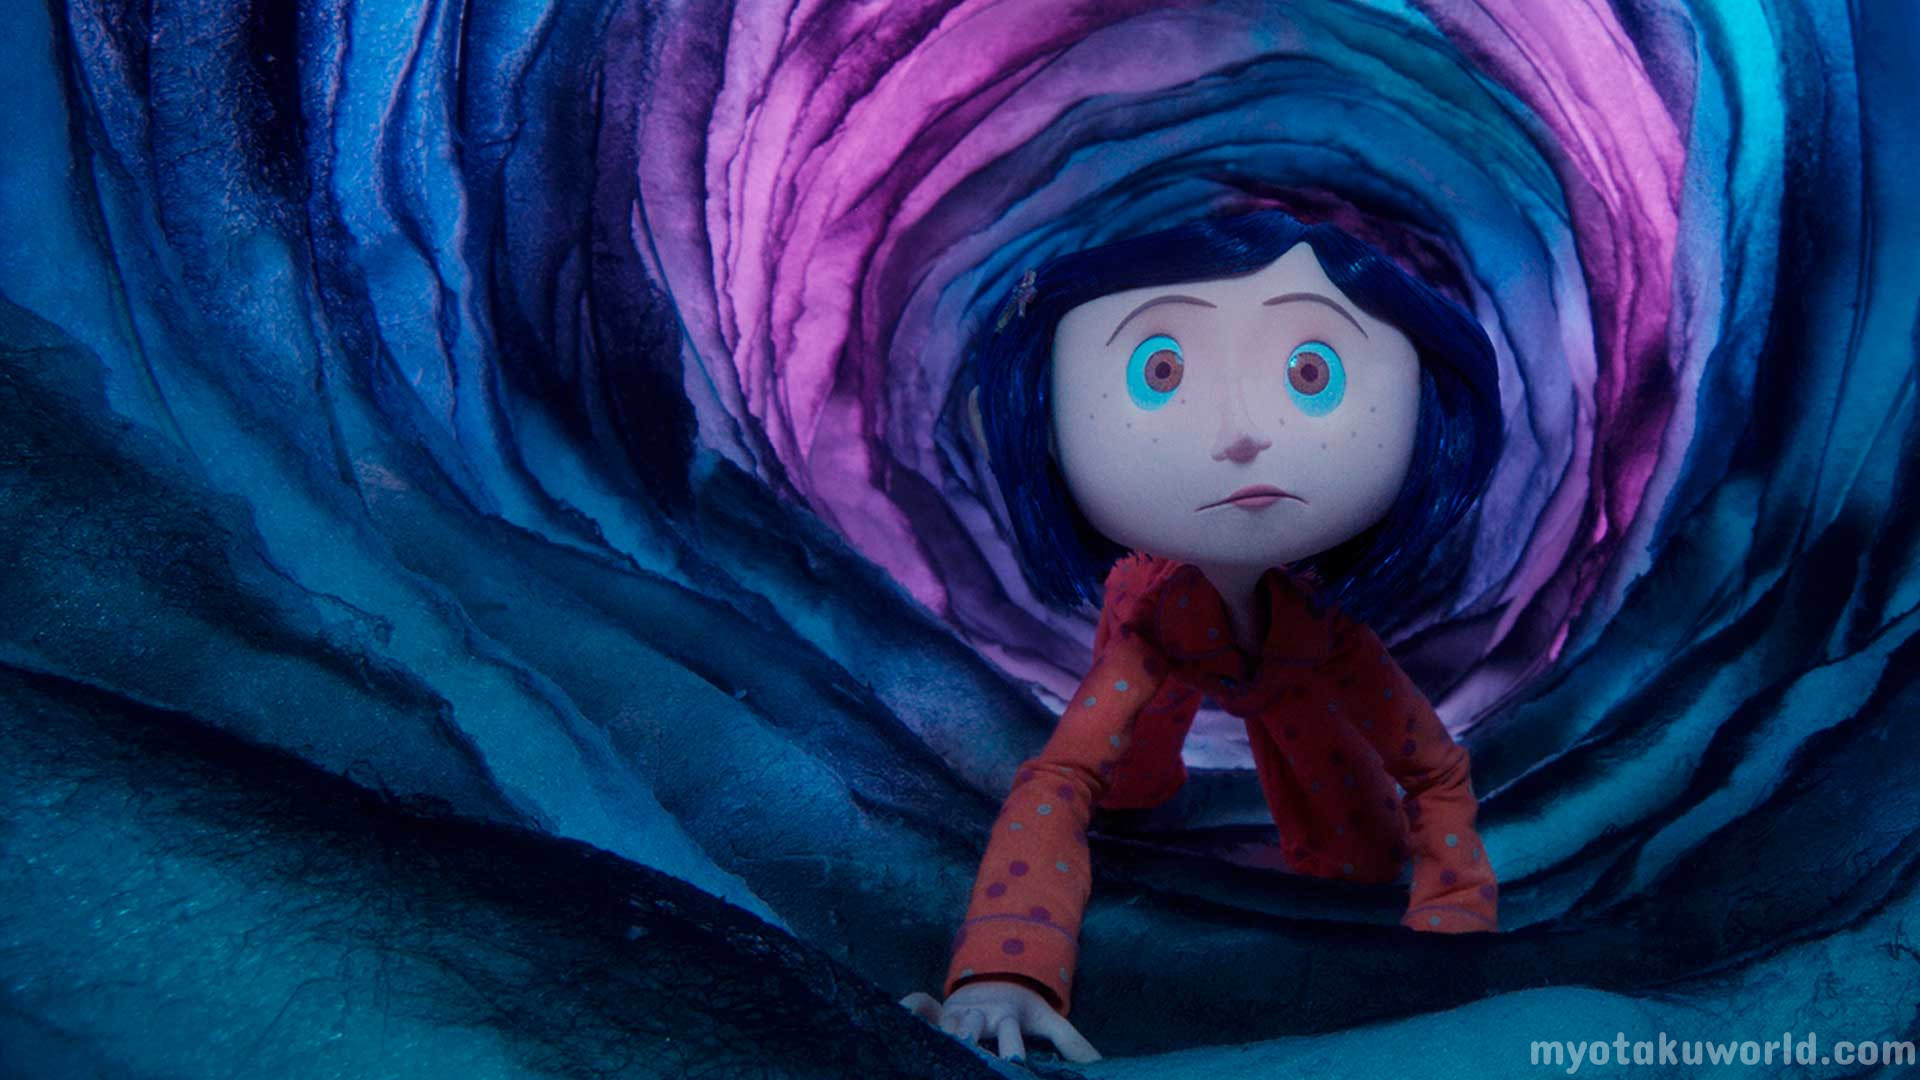 Where to Watch Coraline Online